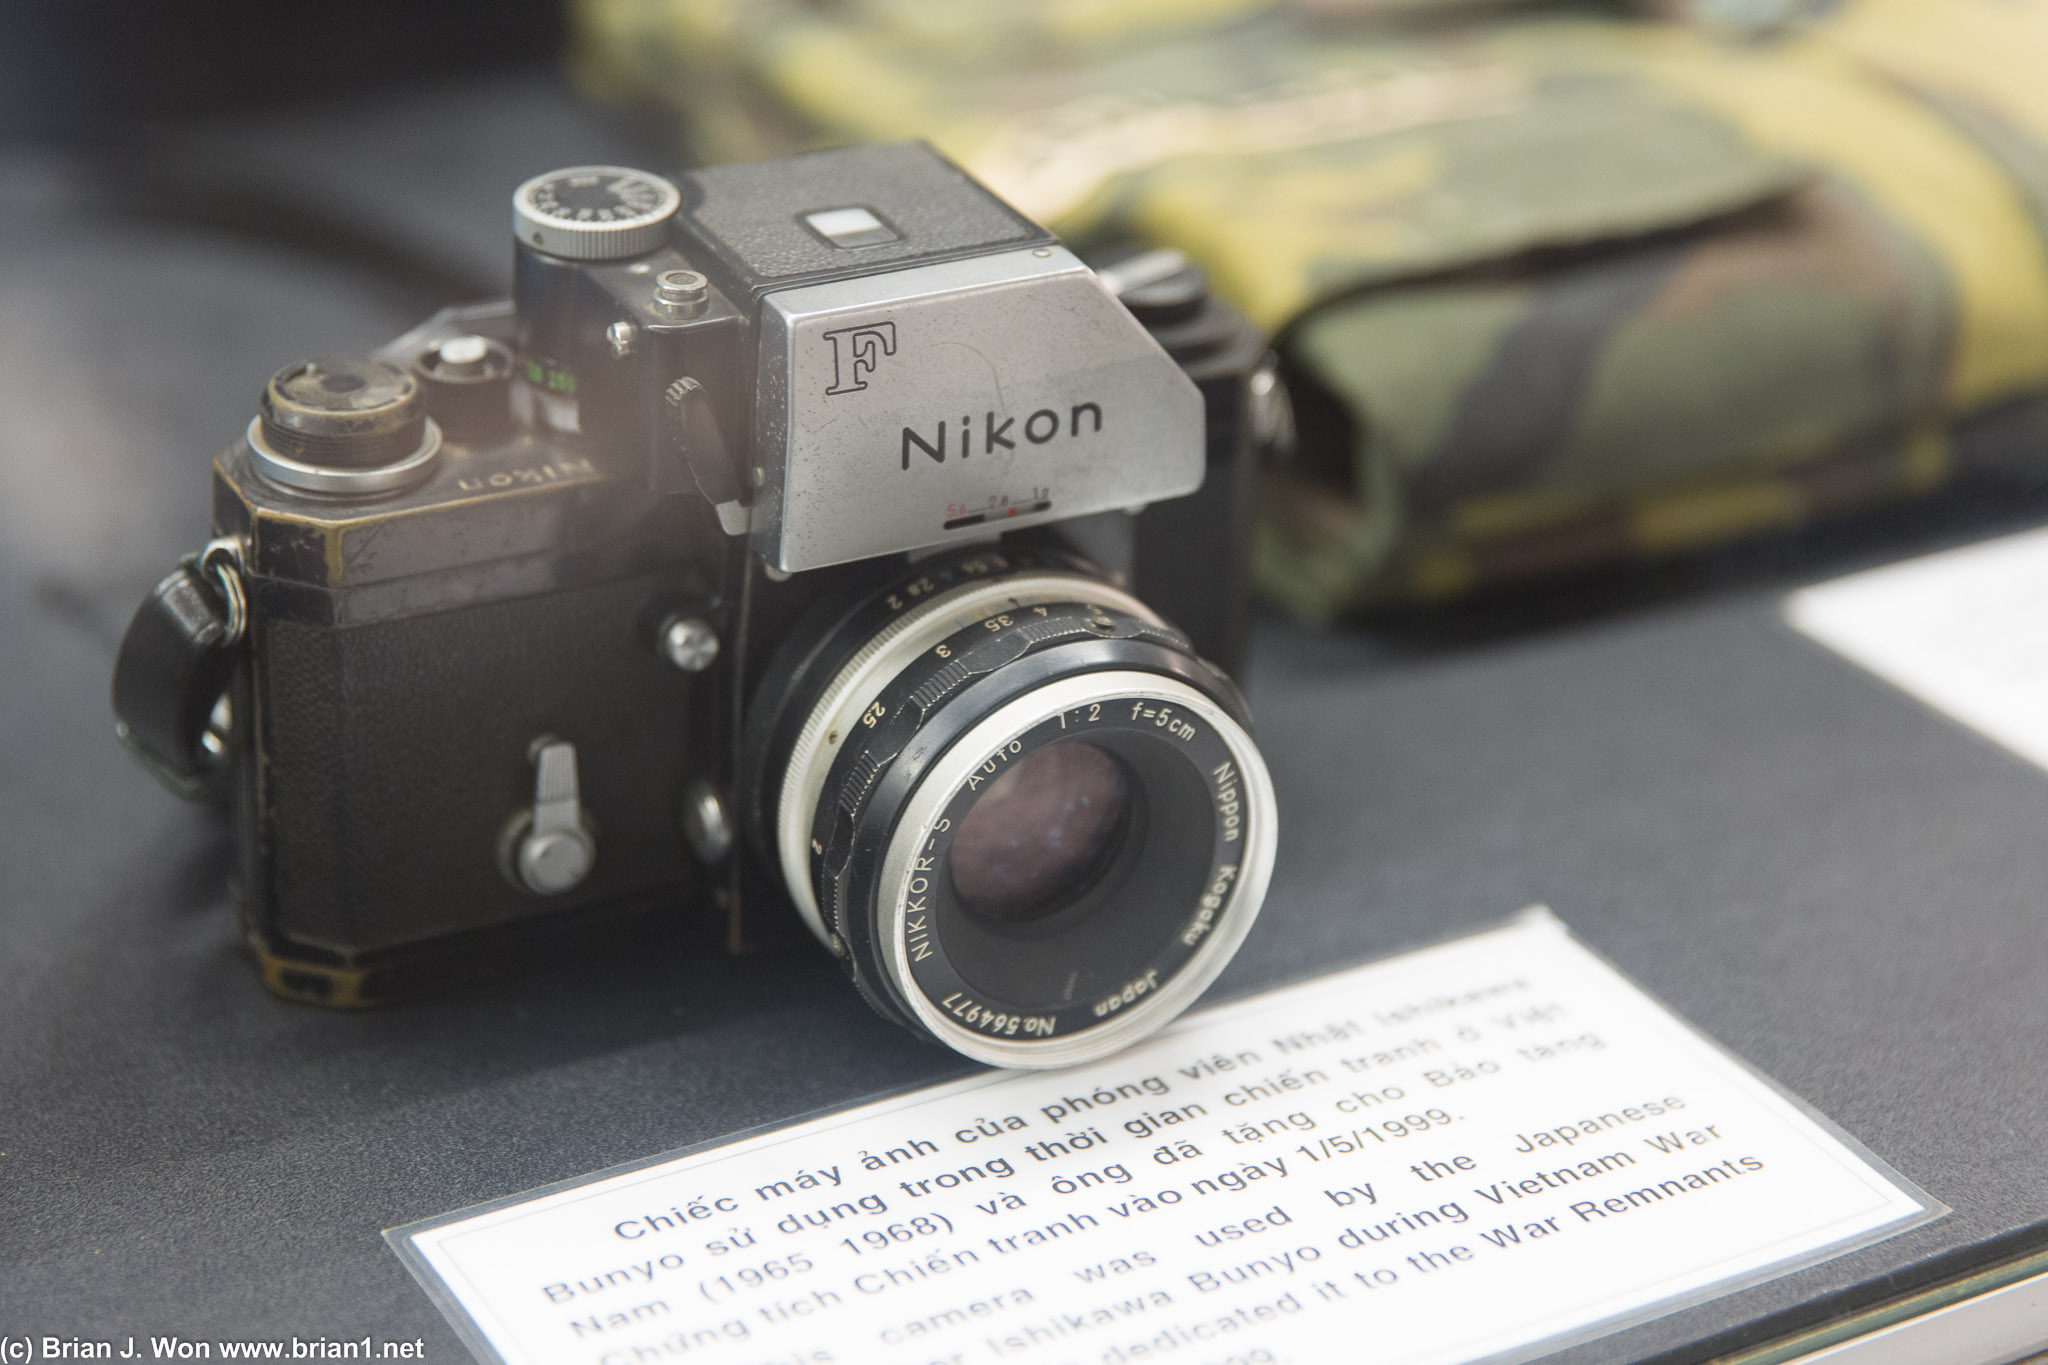 Nikon F-series with 50mm/2.0 lens.